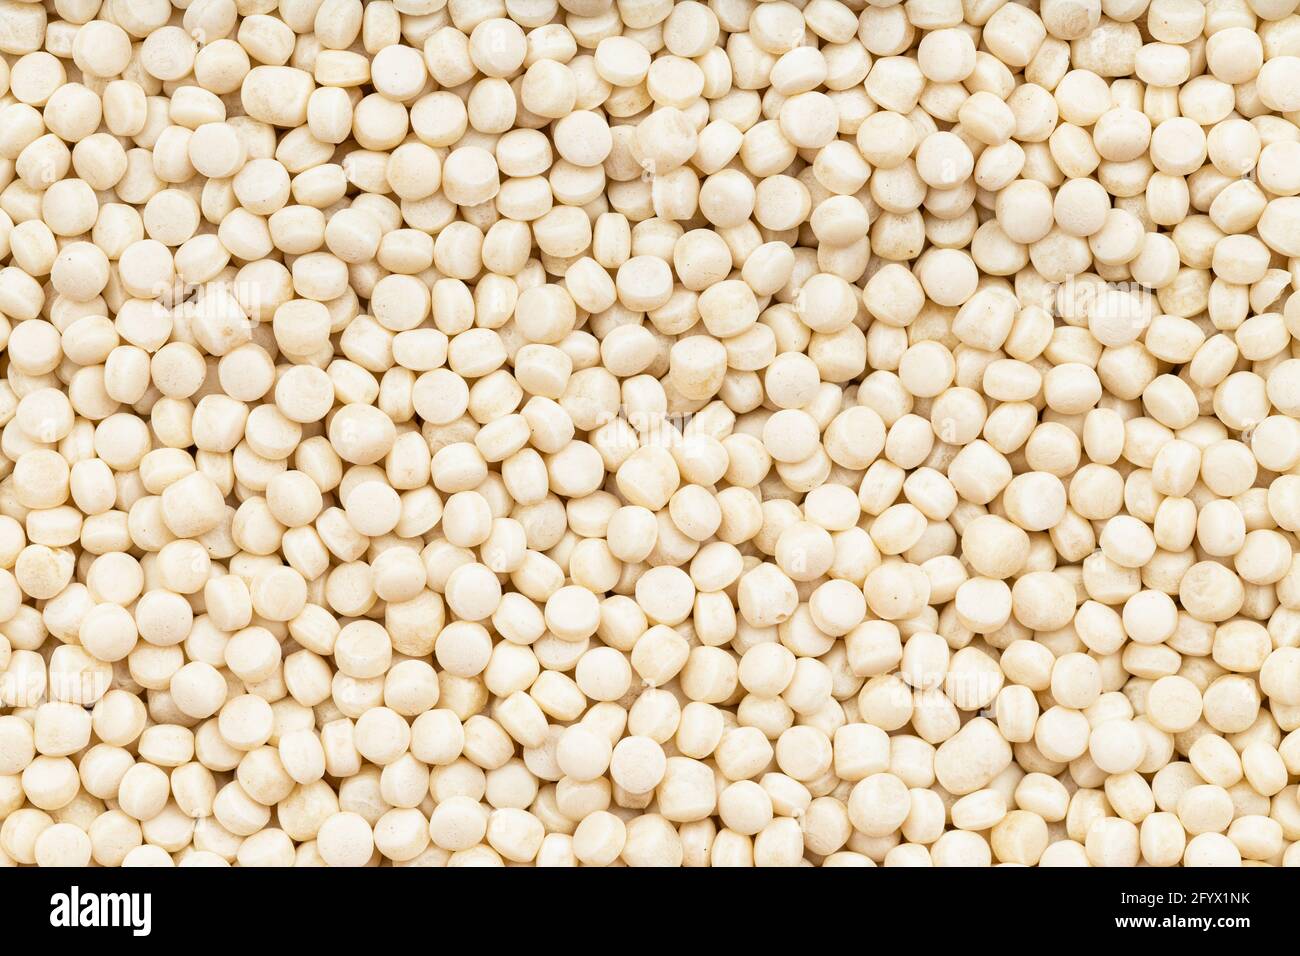 food background - many israeli pearl couscous grains close up Stock Photo